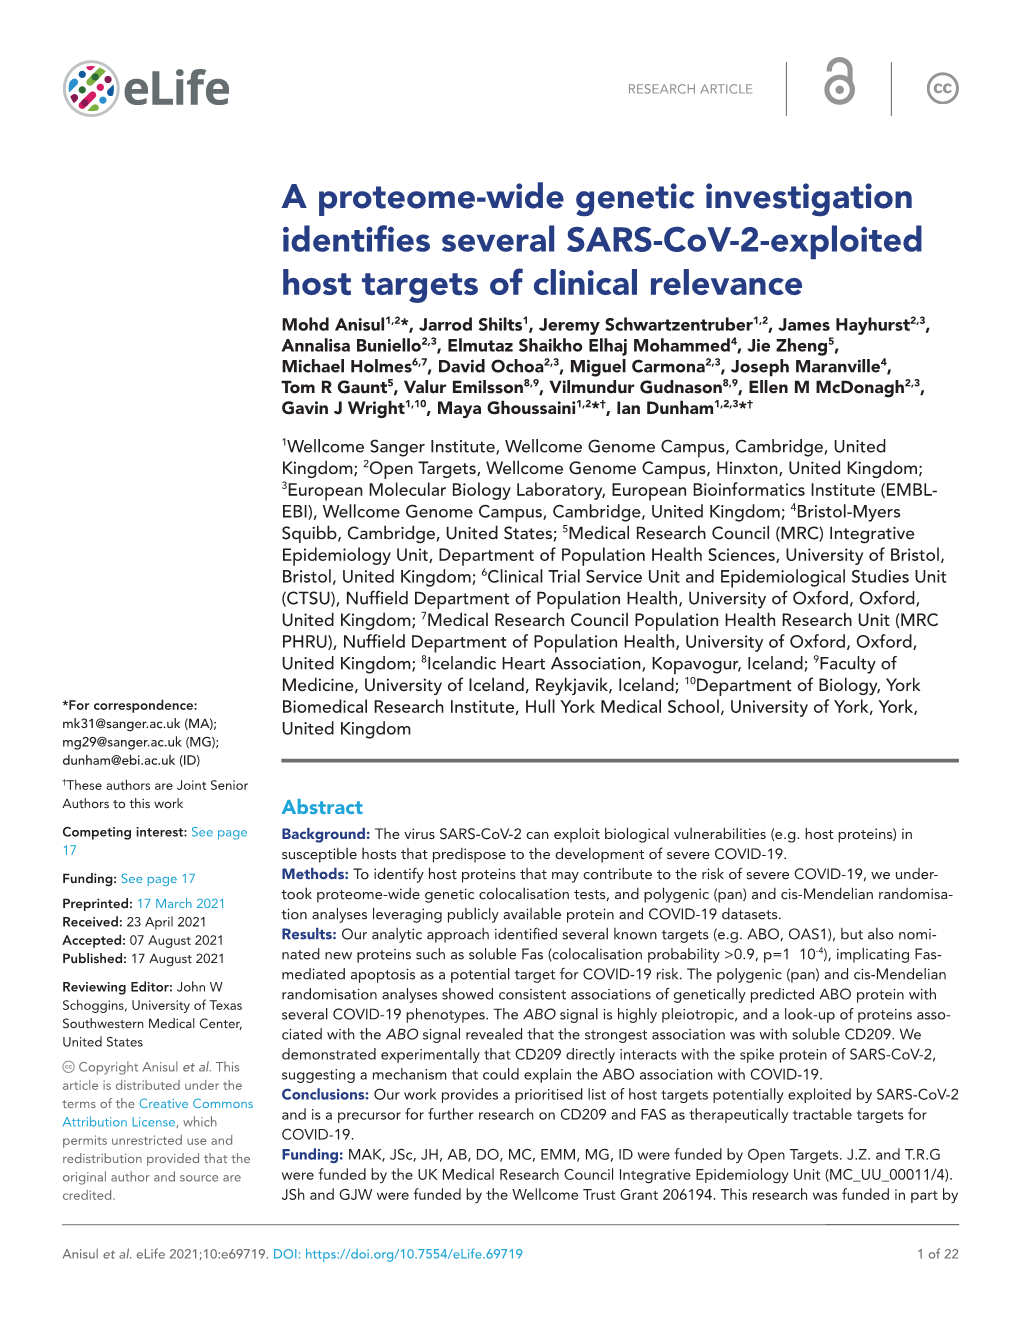 A Proteome-Wide Genetic Investigation Identifies Several SARS-Cov-2